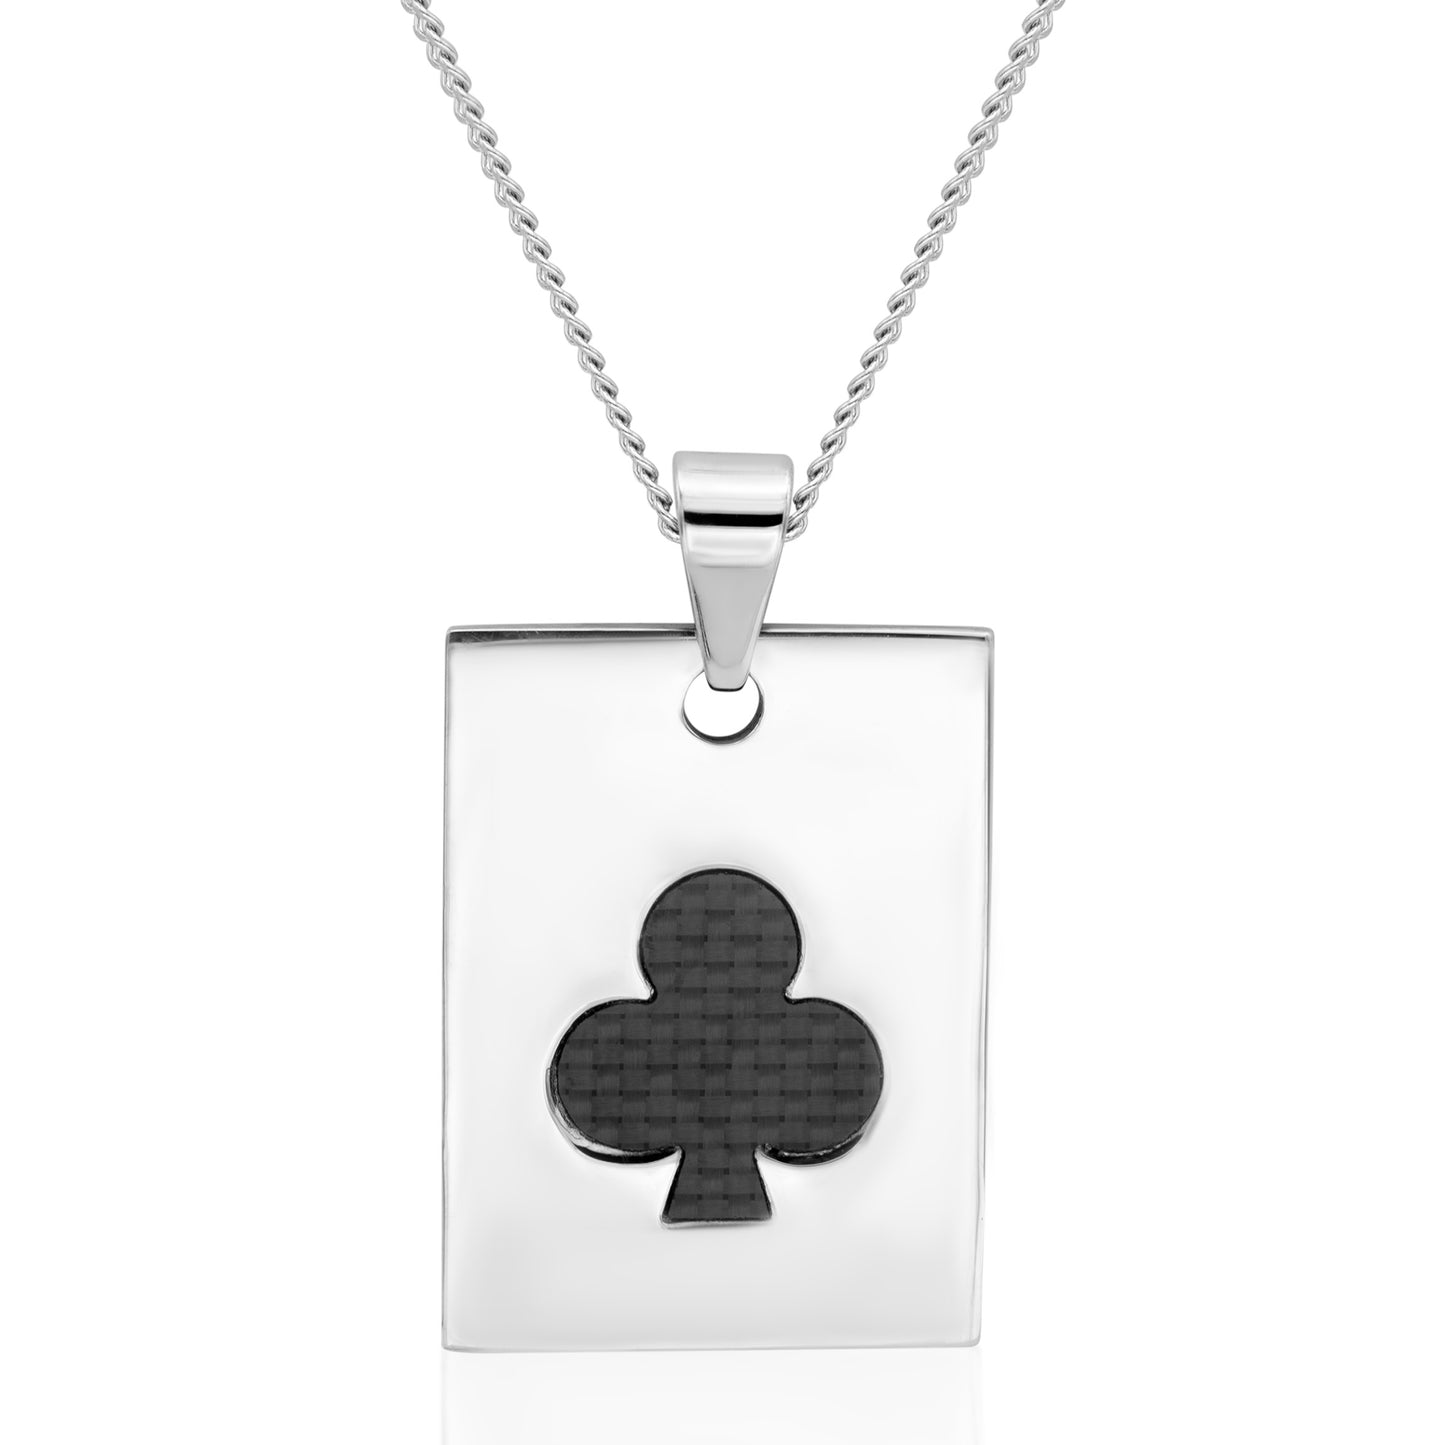 Ace of Spades Lucky Charm Pendant Necklace